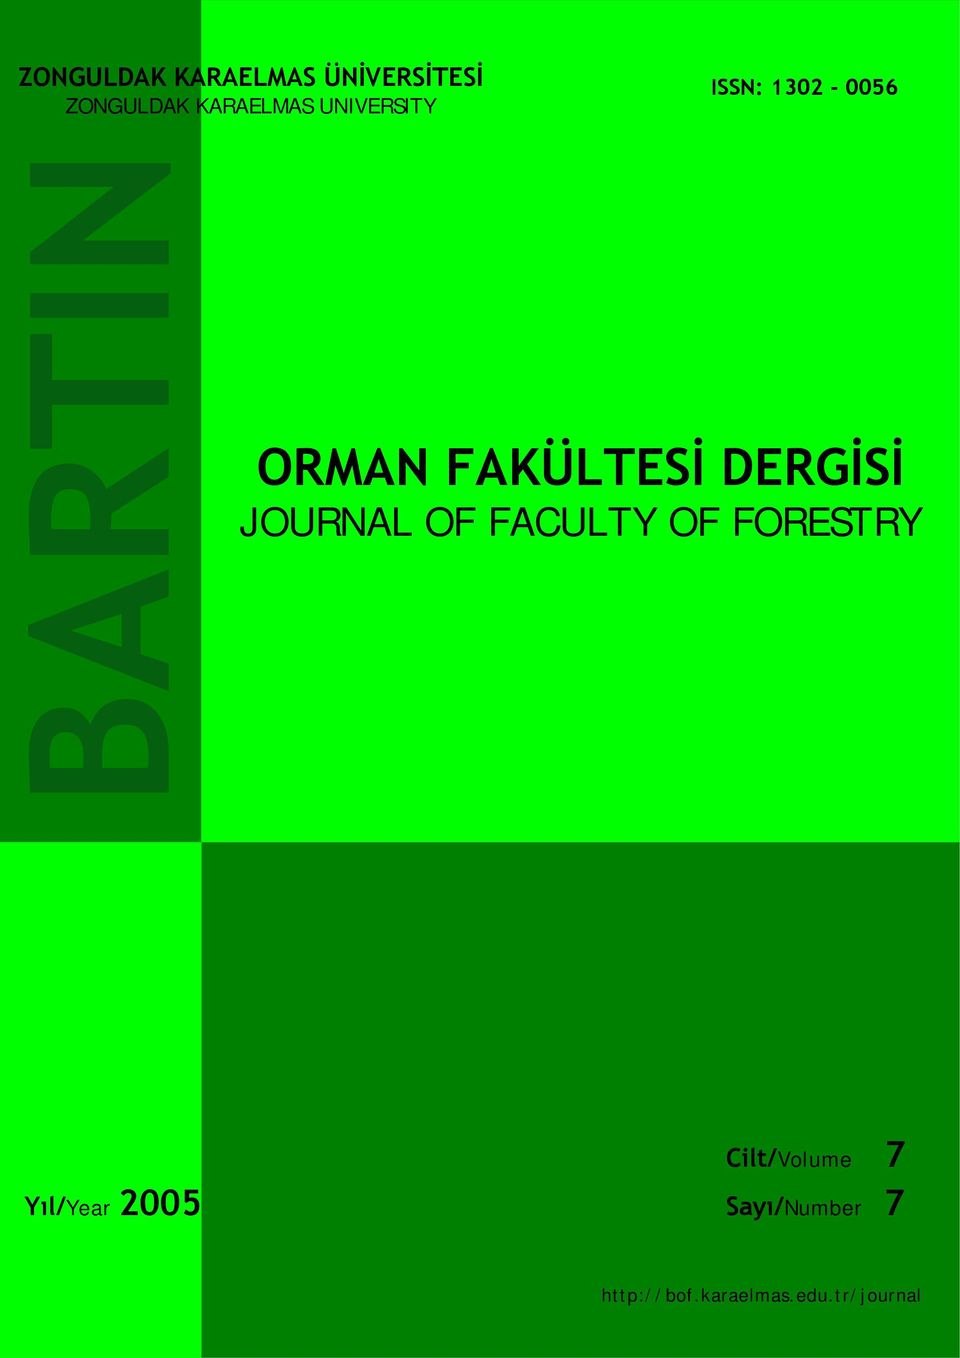 FAKÜLTESİ DERGİSİ JOURNAL OF FACULTY OF FORESTRY